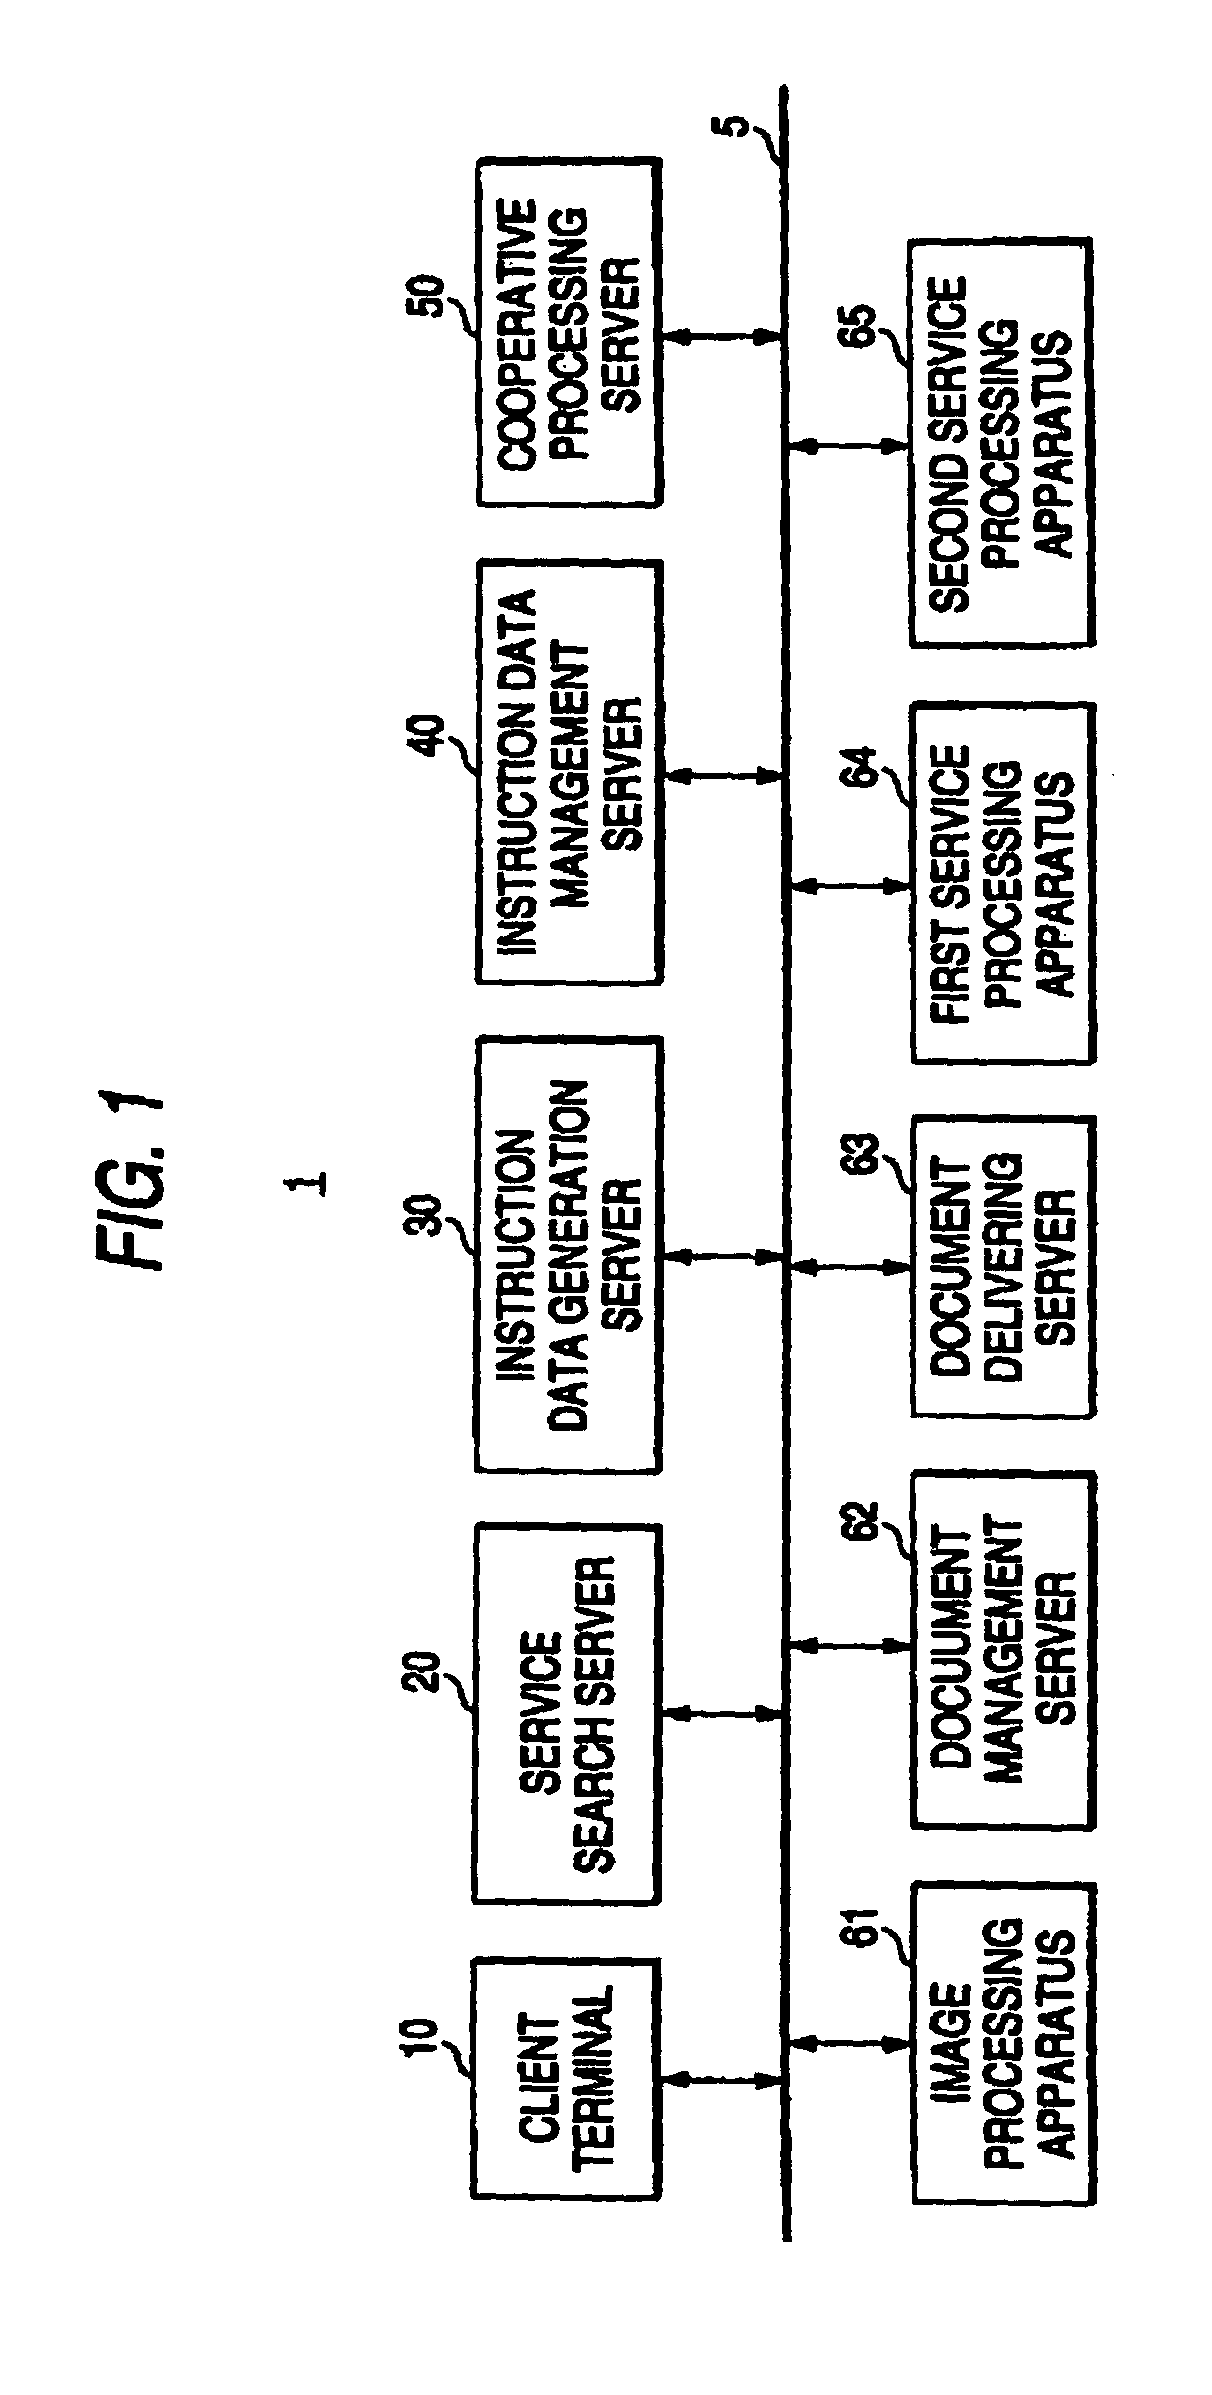 Service processing apparatus and service processing method